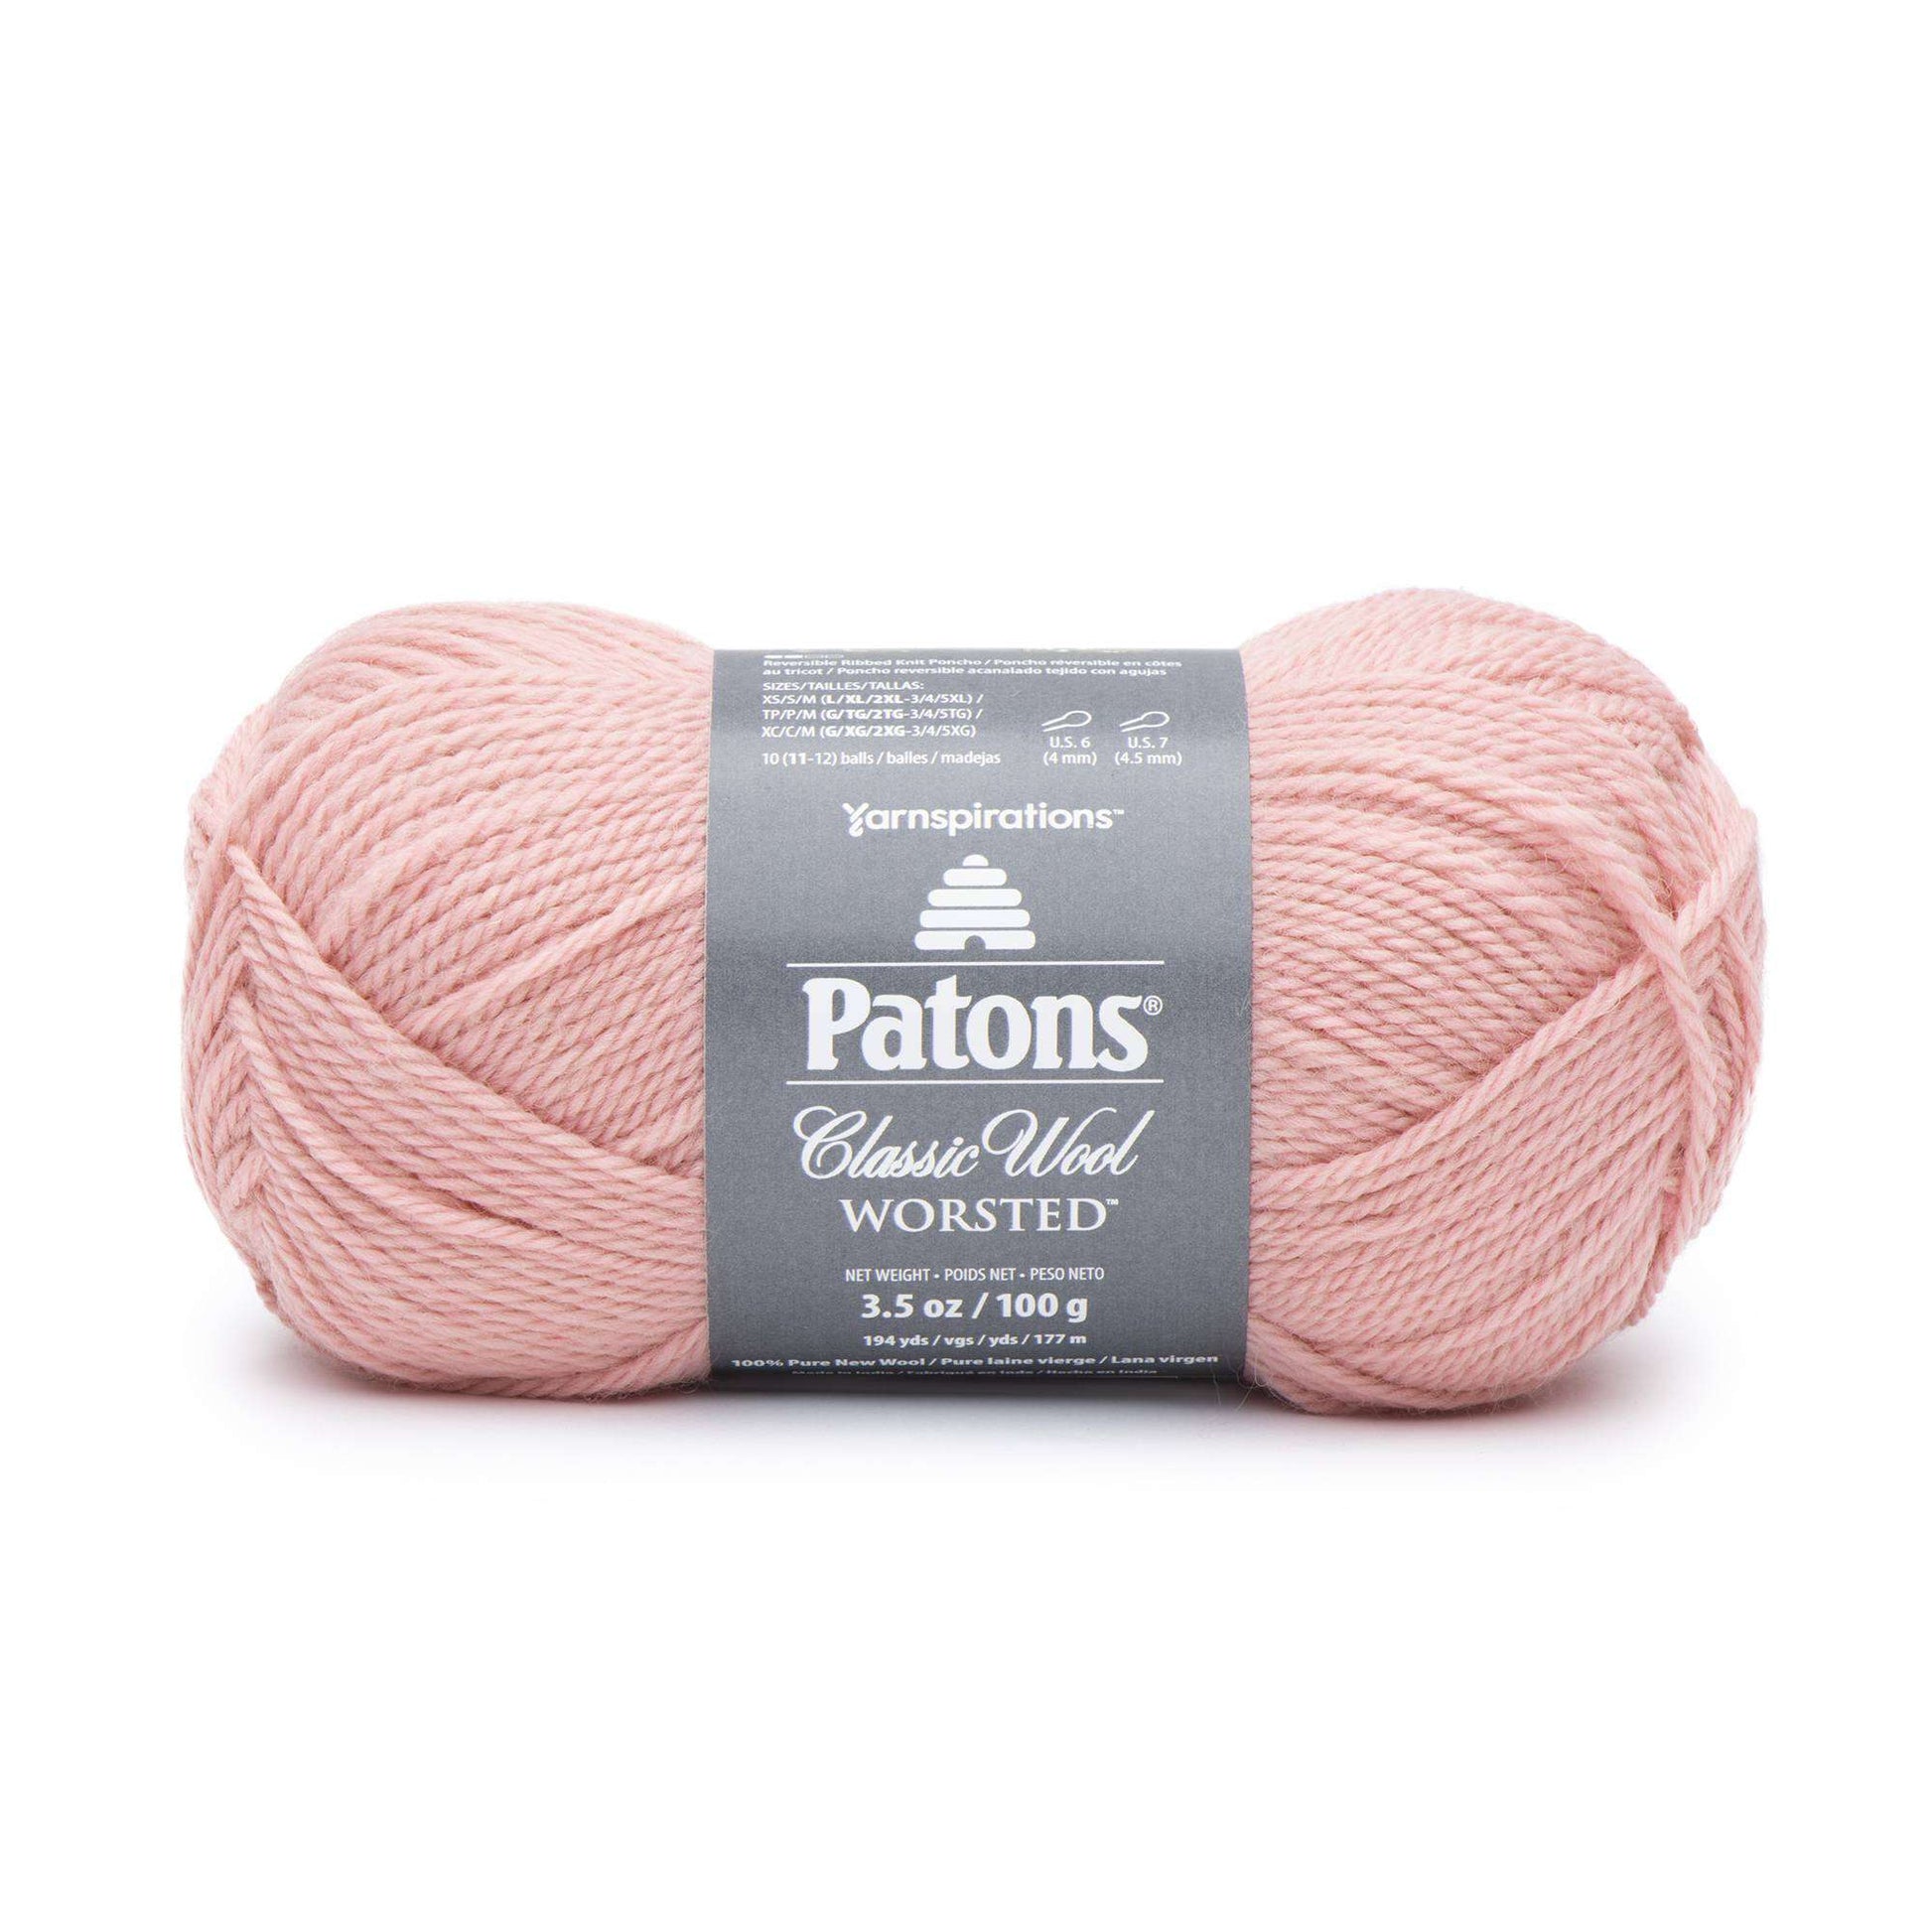 SPROUT Patons Classic Wool Worsted Yarn Medium Weight 4. 100% Wool Yarn.  3.5oz 194 Yards 100g 177m 